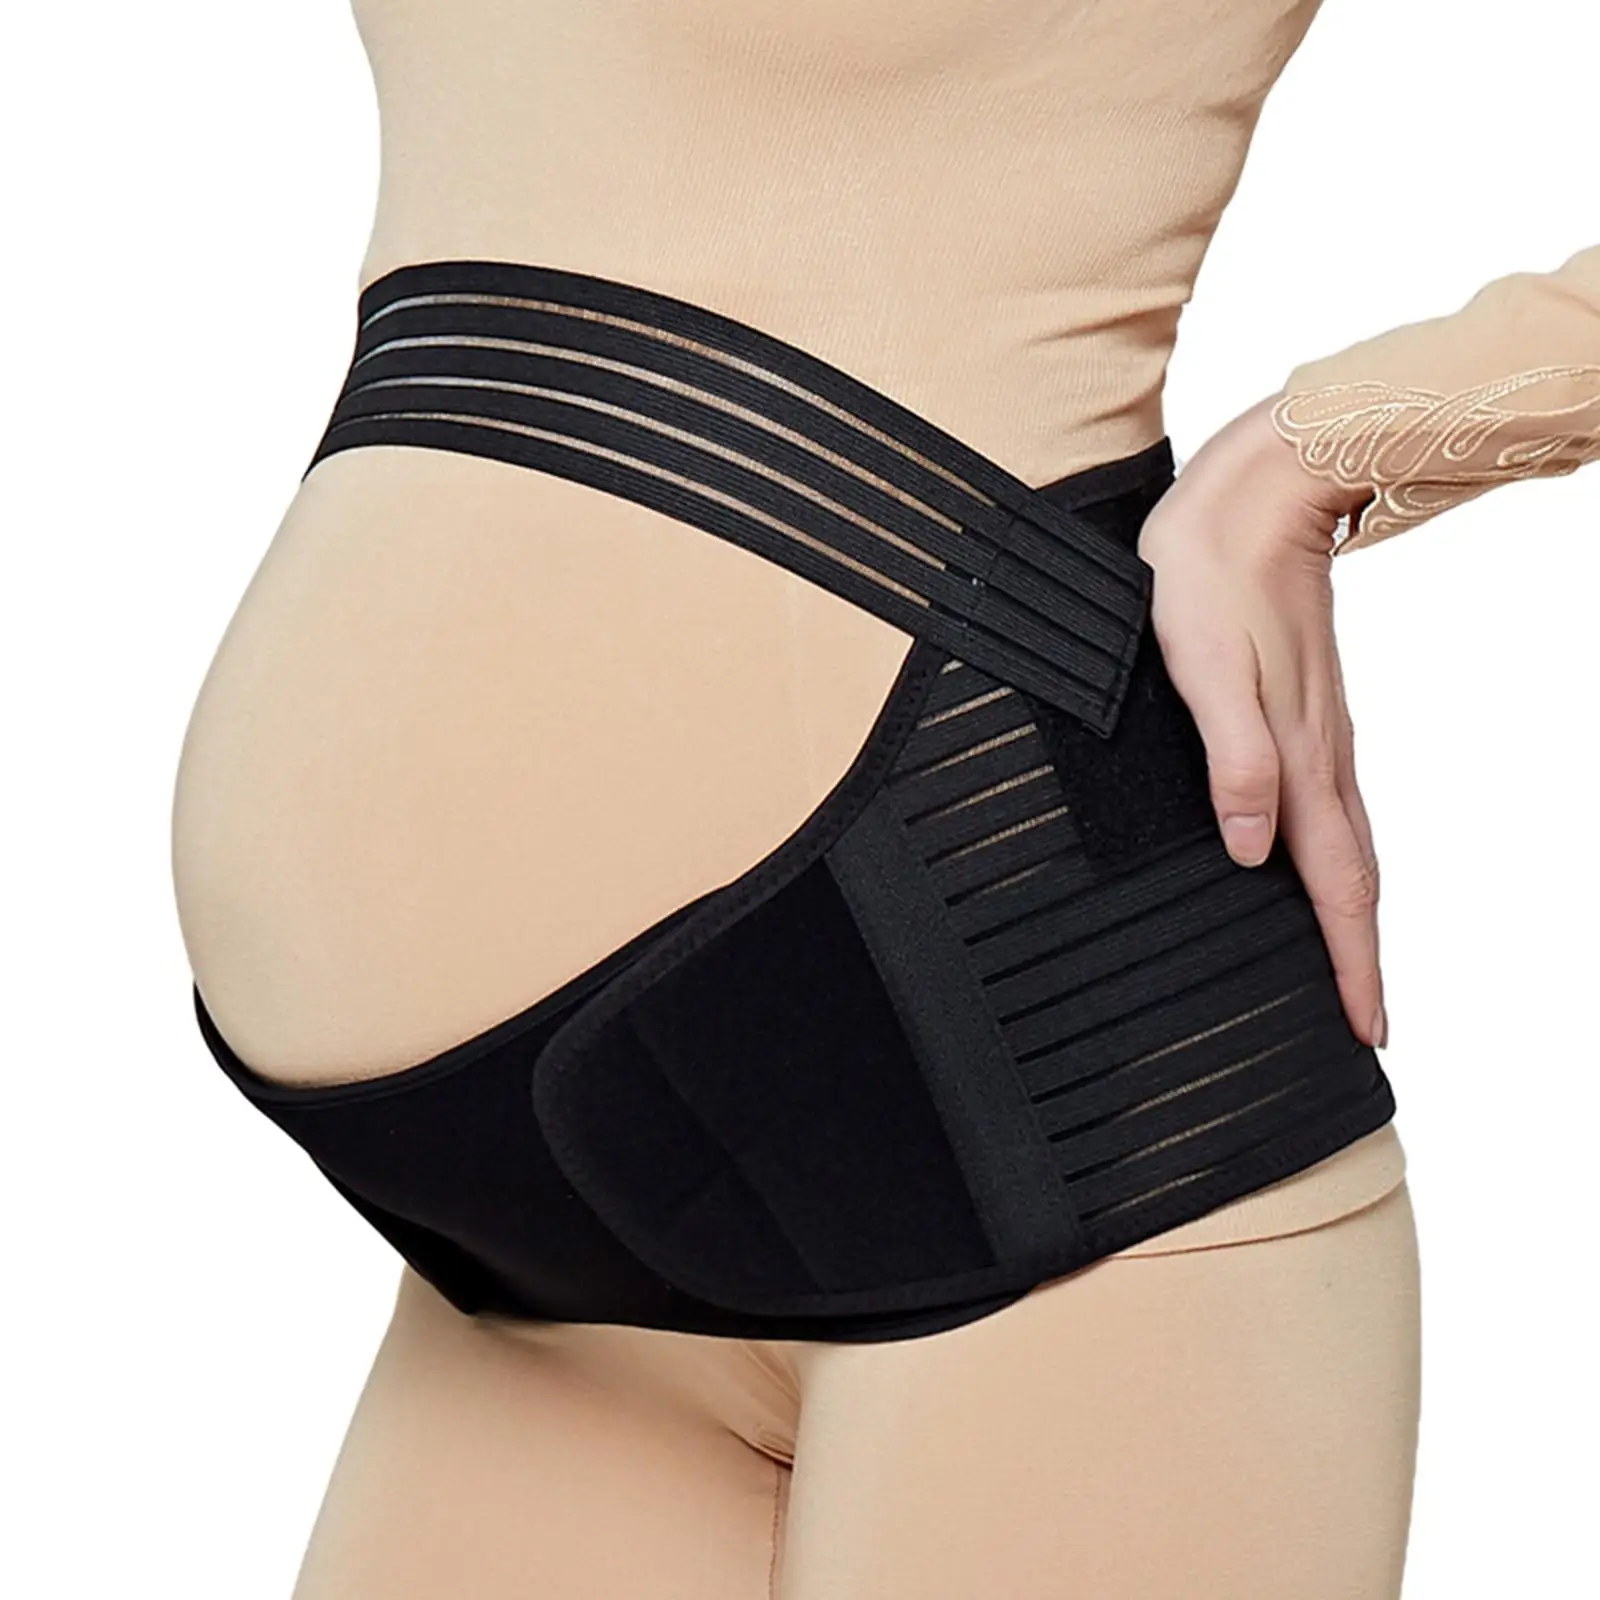 Pregnancy Supporting Band Belly Brace Black, Adjustable Convenient Comfortable